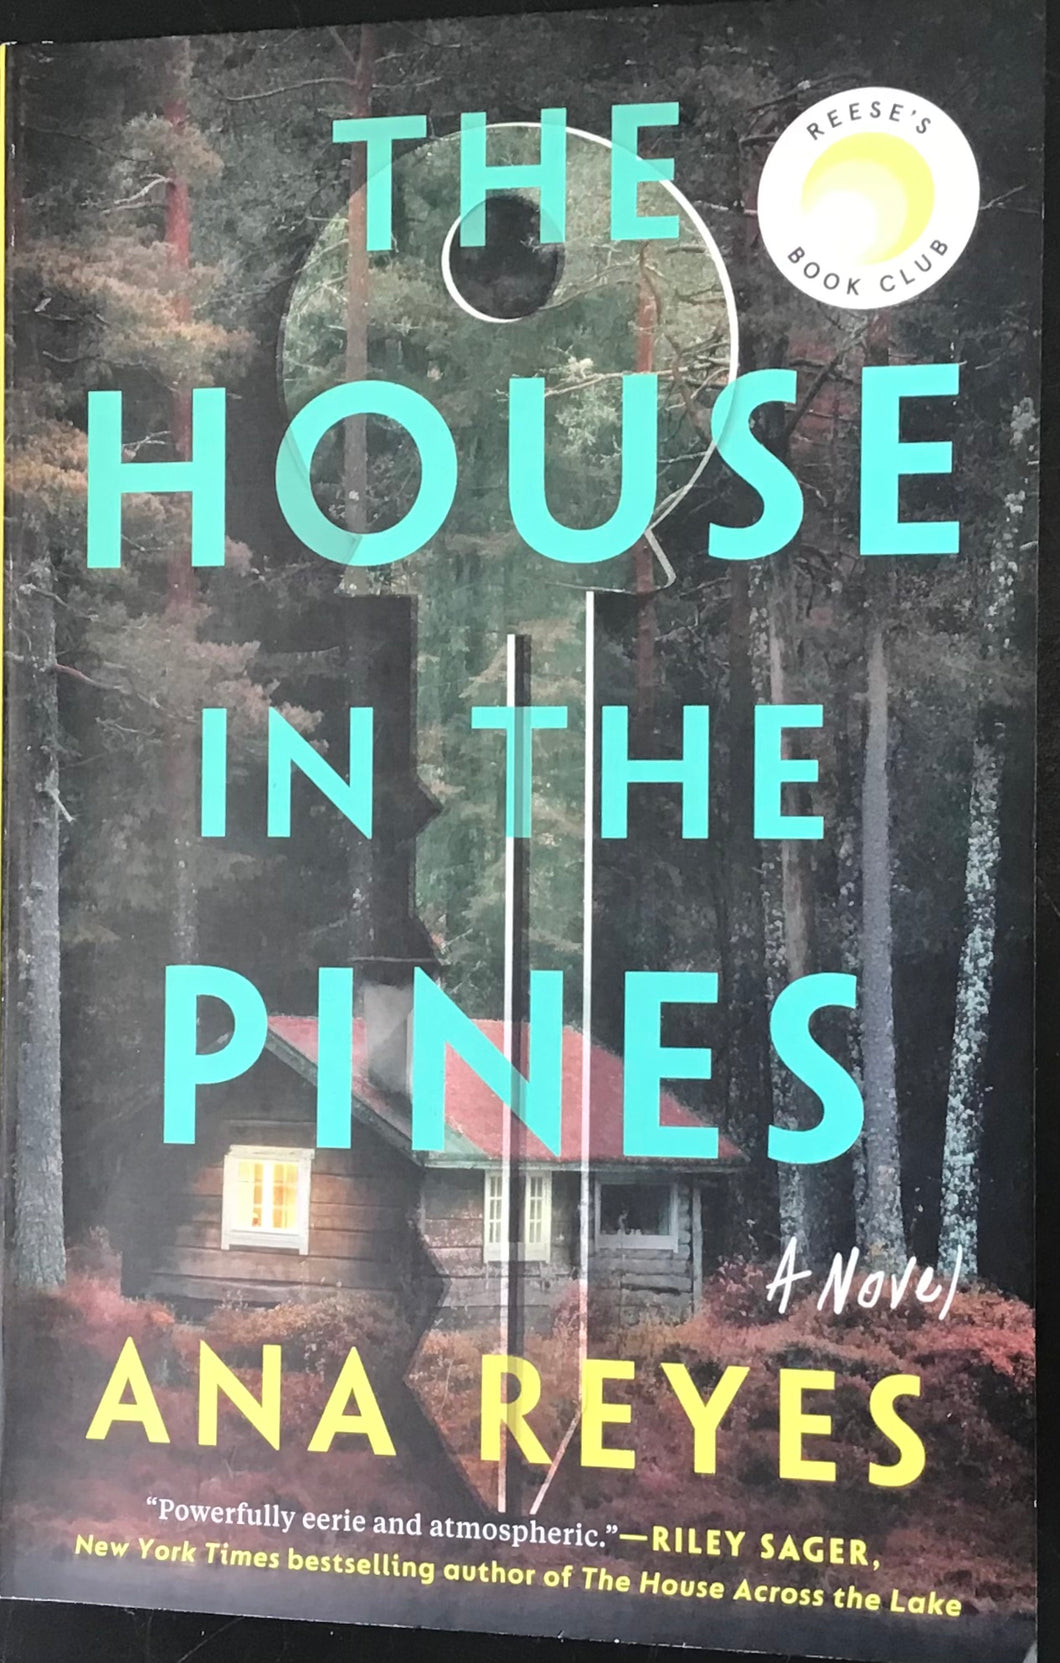 The House in the Pines, Ana Reyes